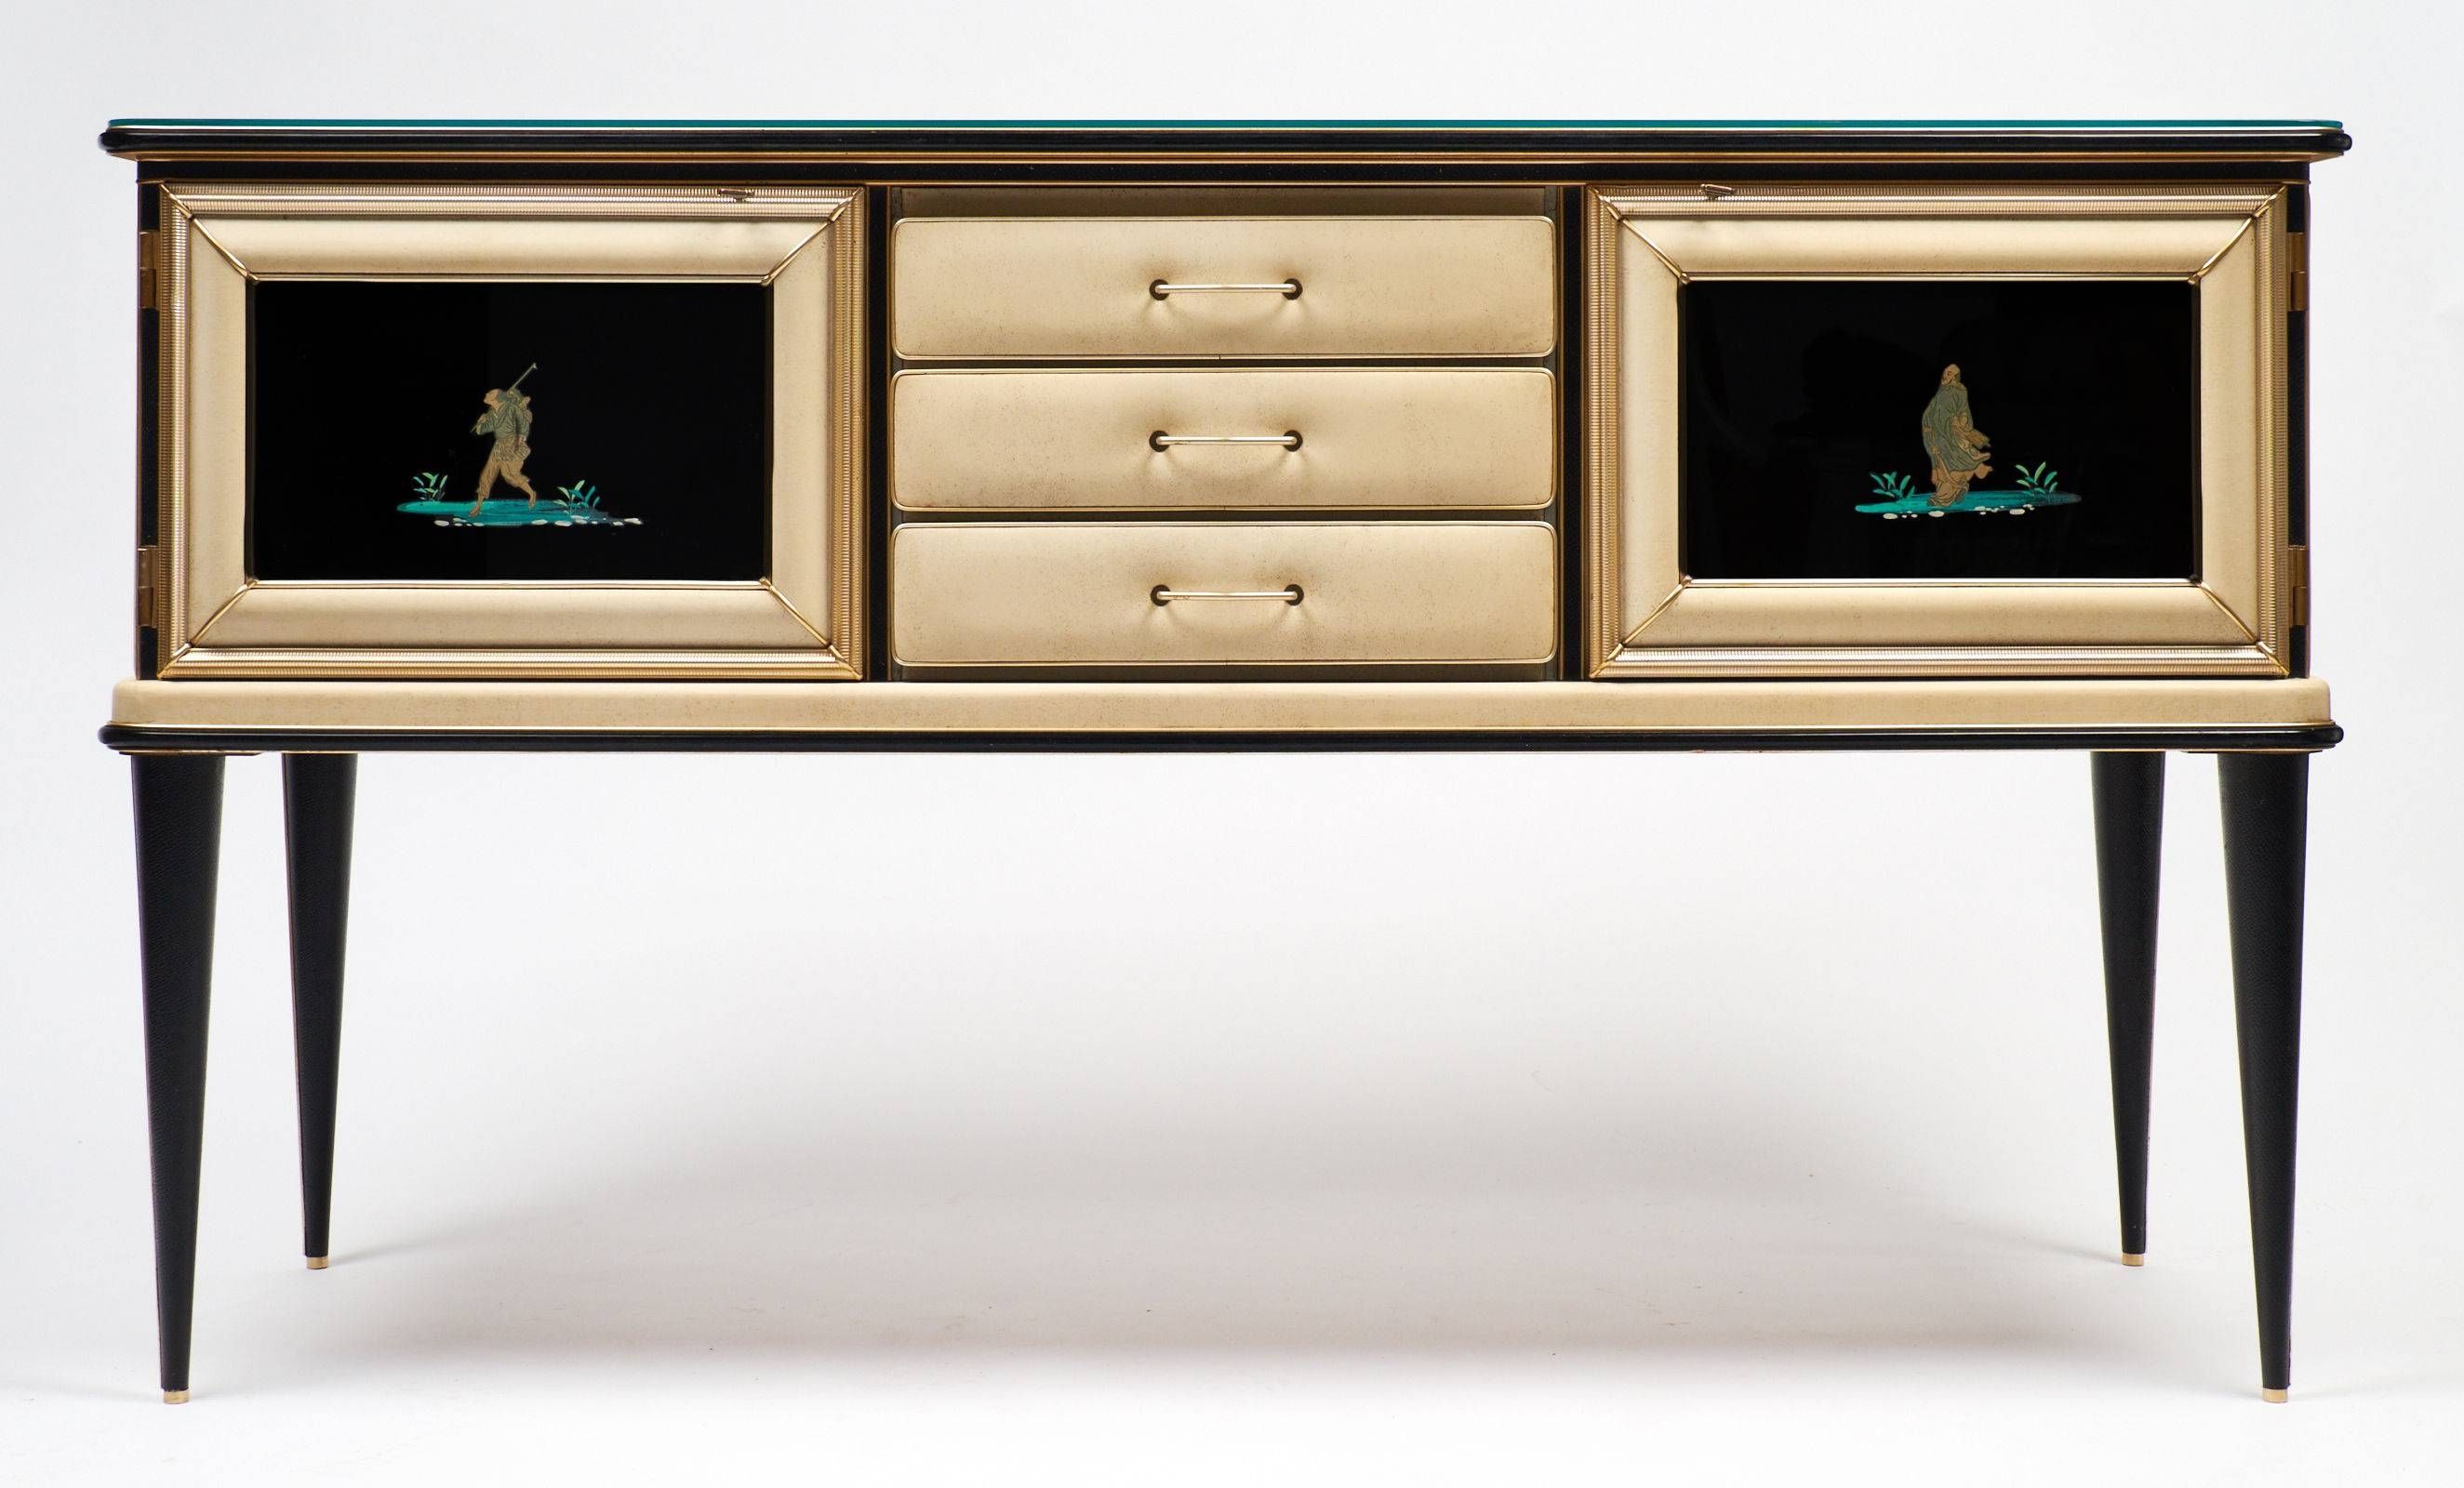 Vintage Umberto Mascagni Chinoiserie Sideboard – Jean Marc Fray Intended For Chinoiserie Sideboard (View 9 of 20)